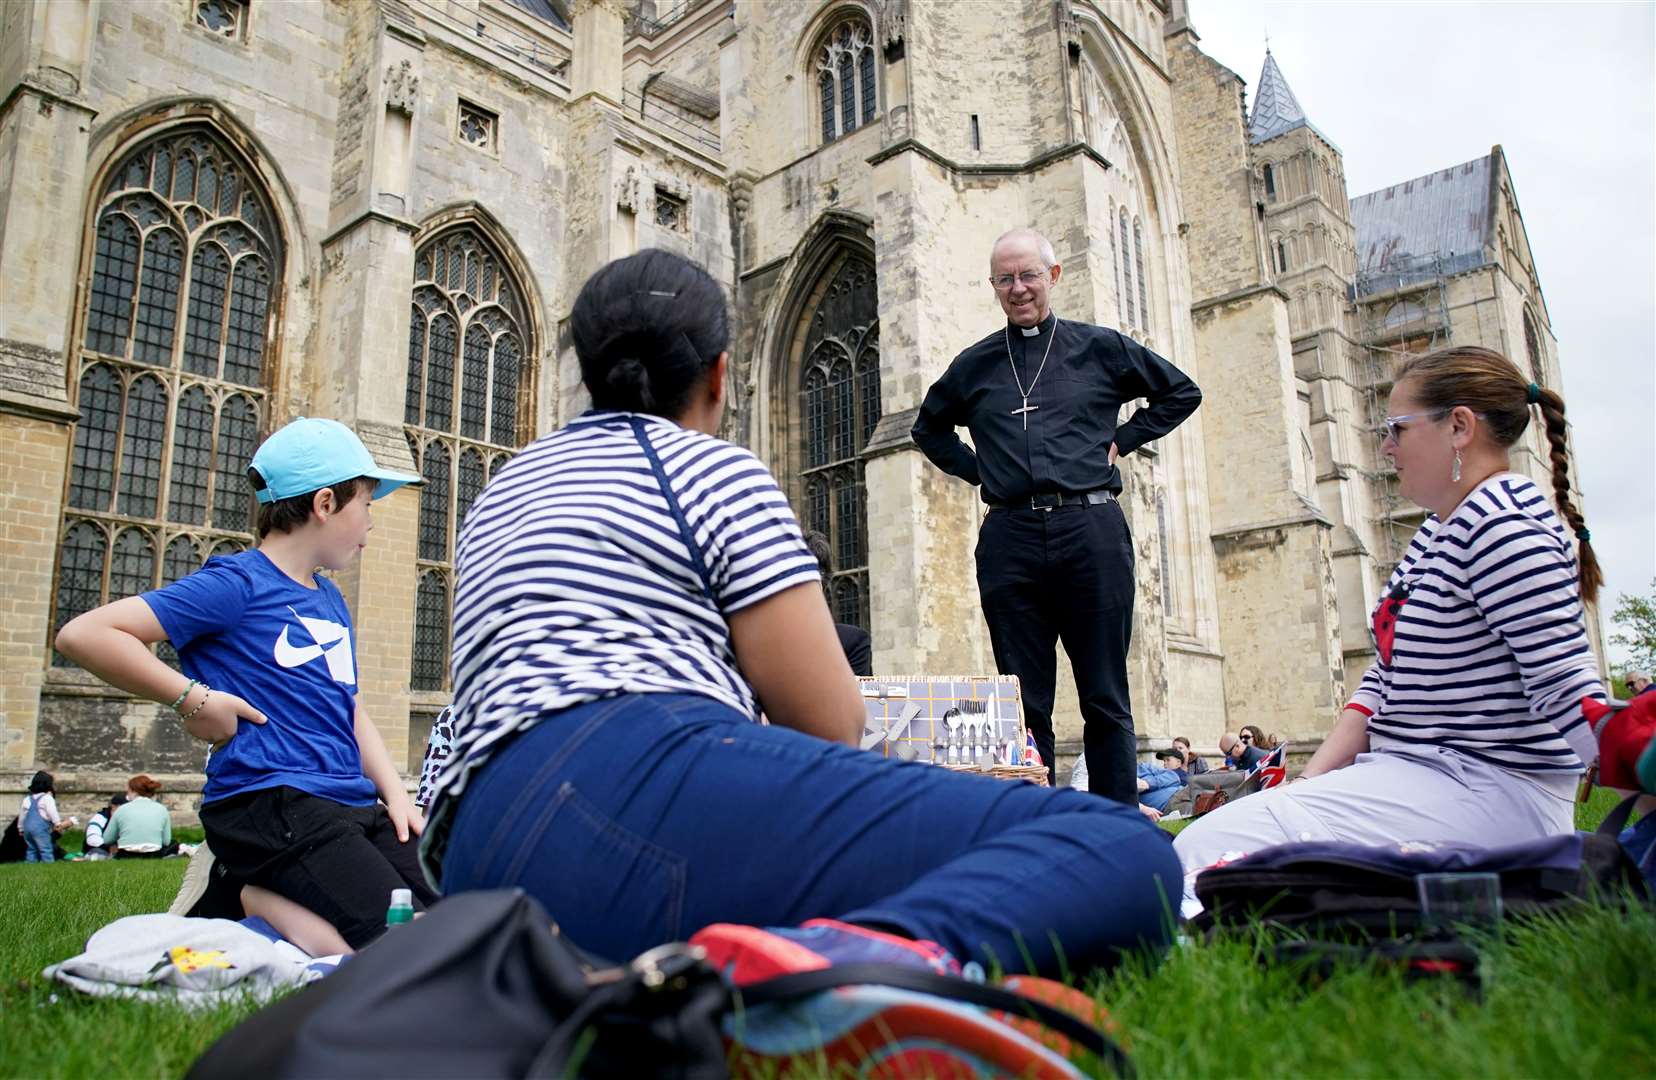 Archbishop of Canterbury Justin Welby attends the Coronation Big Lunch in the grounds of Canterbury Cathedral (Gareth Fuller/PA)